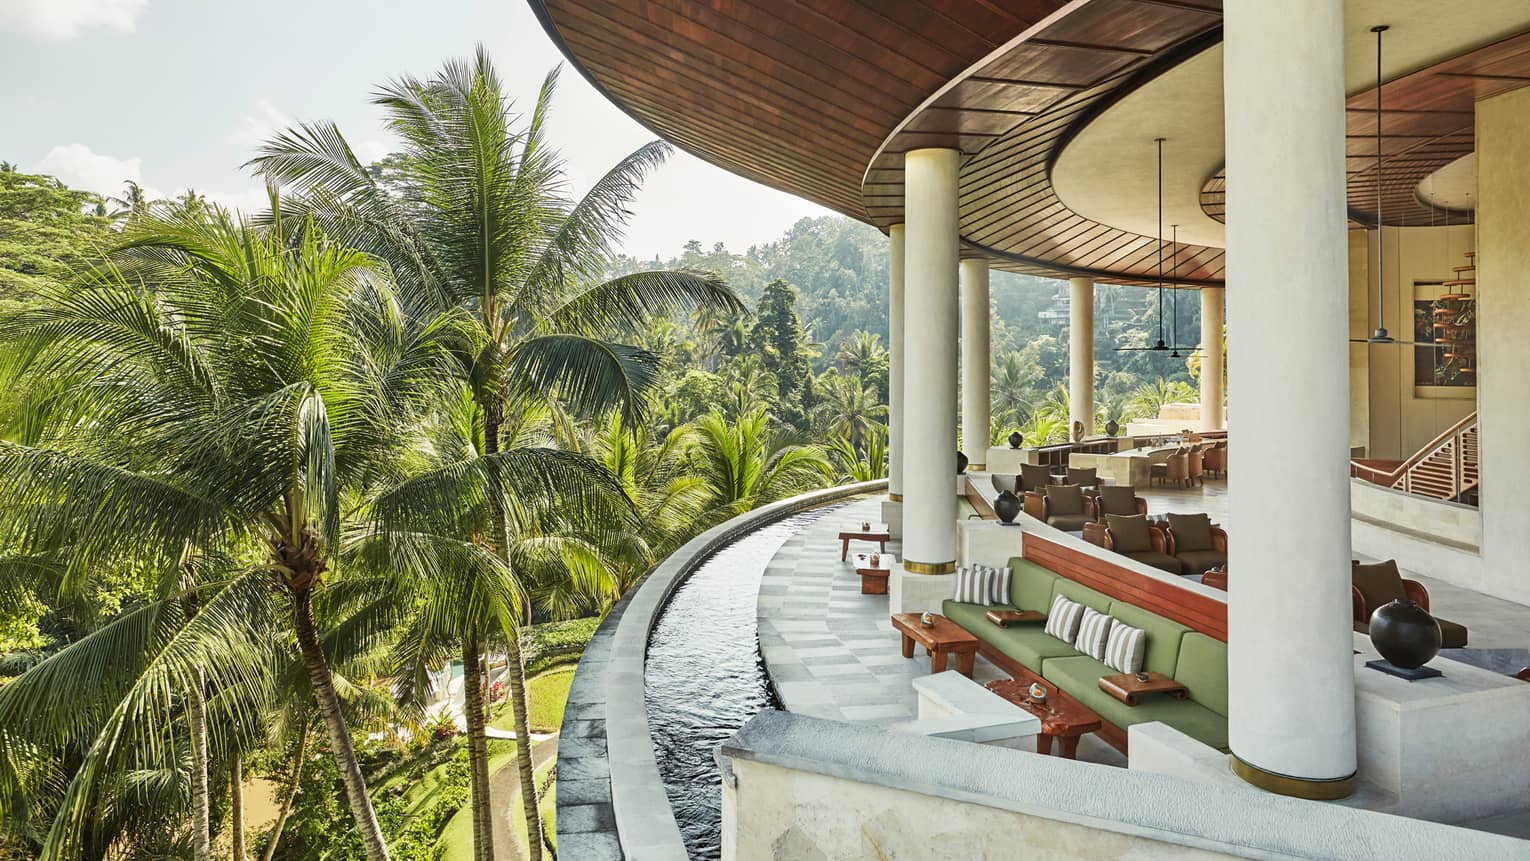 Curved outdoor balcony with water around ledge, green and wood sofas, chairs, vases, large palm leaves outdoors